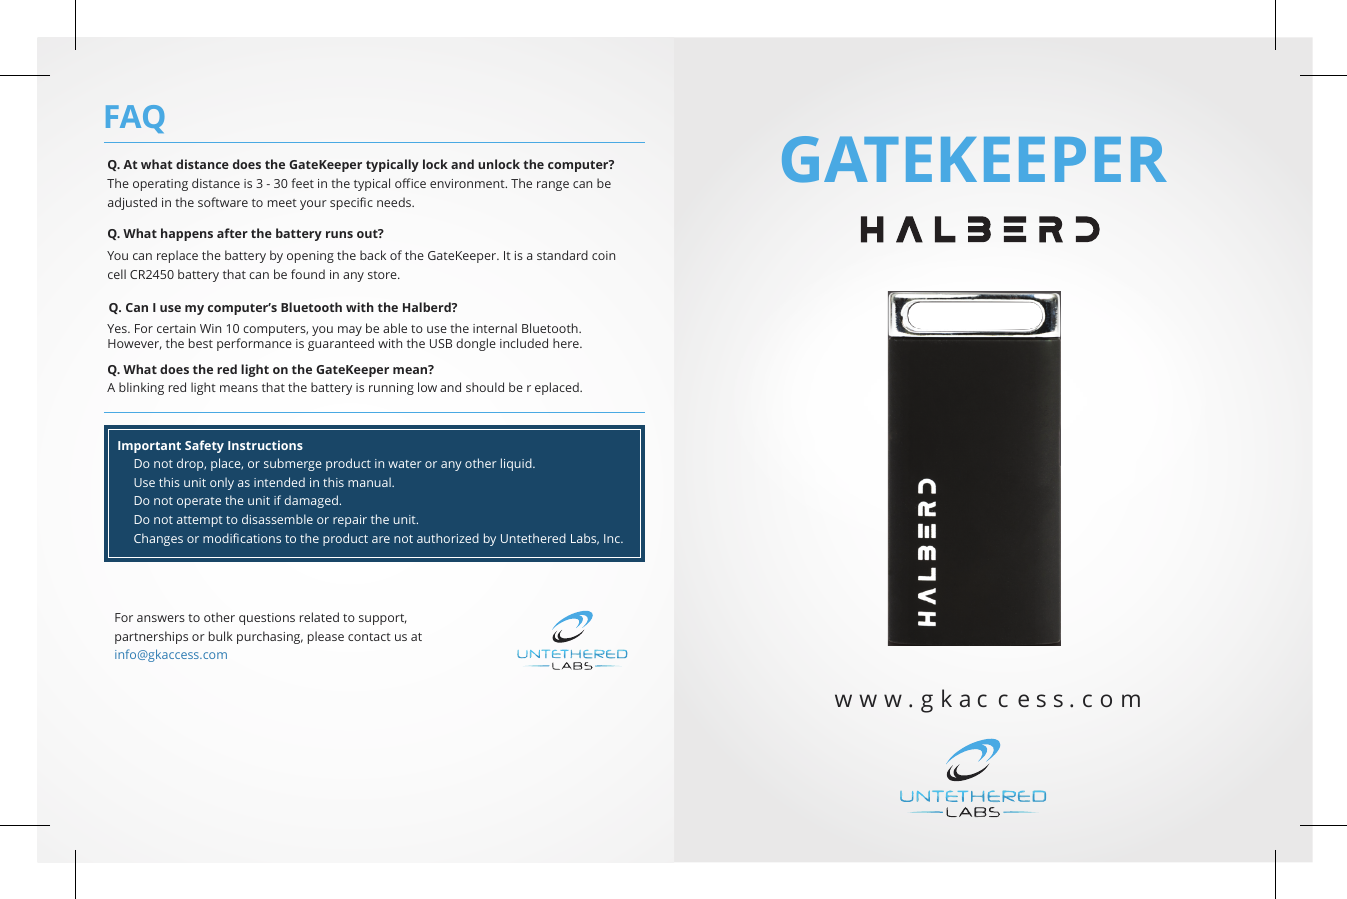 GATEKEEPERw w w . g k a c c e s s   .   c   o   mQ. At what distance does the GateKeeper typically lock and unlock the computer? The operating distance is 3 - 30 feet in the typical oﬃce environment. The range can beadjusted in the software to meet your speciﬁc needs. Q. What happens after the battery runs out? You can replace the battery by opening the back of the GateKeeper. It is a standard coincell CR2450 battery that can be found in any store. Q. Can I use my computer’s Bluetooth with the Halberd? Yes. For certain Win 10 computers, you may be able to use the internal Bluetooth.However, the best performance is guaranteed with the USB dongle included here.Q. What does the red light on the GateKeeper mean? A blinking red light means that the battery is running low and should be r eplaced. Important Safety Instructions      Do not drop, place, or submerge product in water or any other liquid.      Use this unit only as intended in this manual.      Do not operate the unit if damaged.      Do not attempt to disassemble or repair the unit.      Changes or modiﬁcations to the product are not authorized by Untethered Labs, Inc. FAQFor answers to other questions related to support,partnerships or bulk purchasing, please contact us atinfo@gkaccess.com